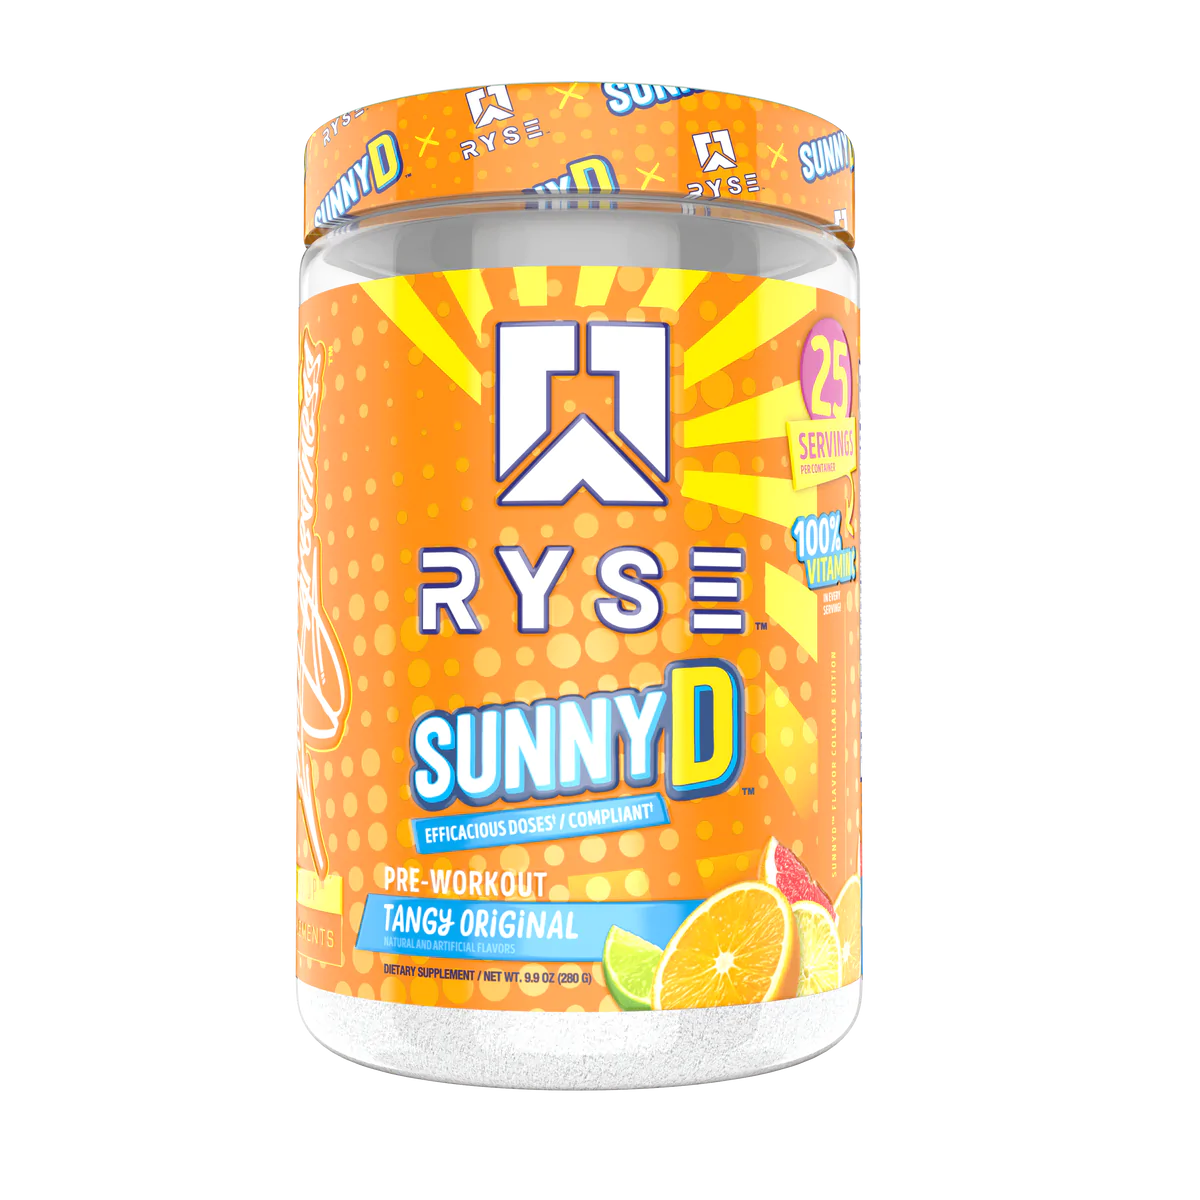 RYSE Project Blackout Pre-Workout - SunnyD Tangy Original